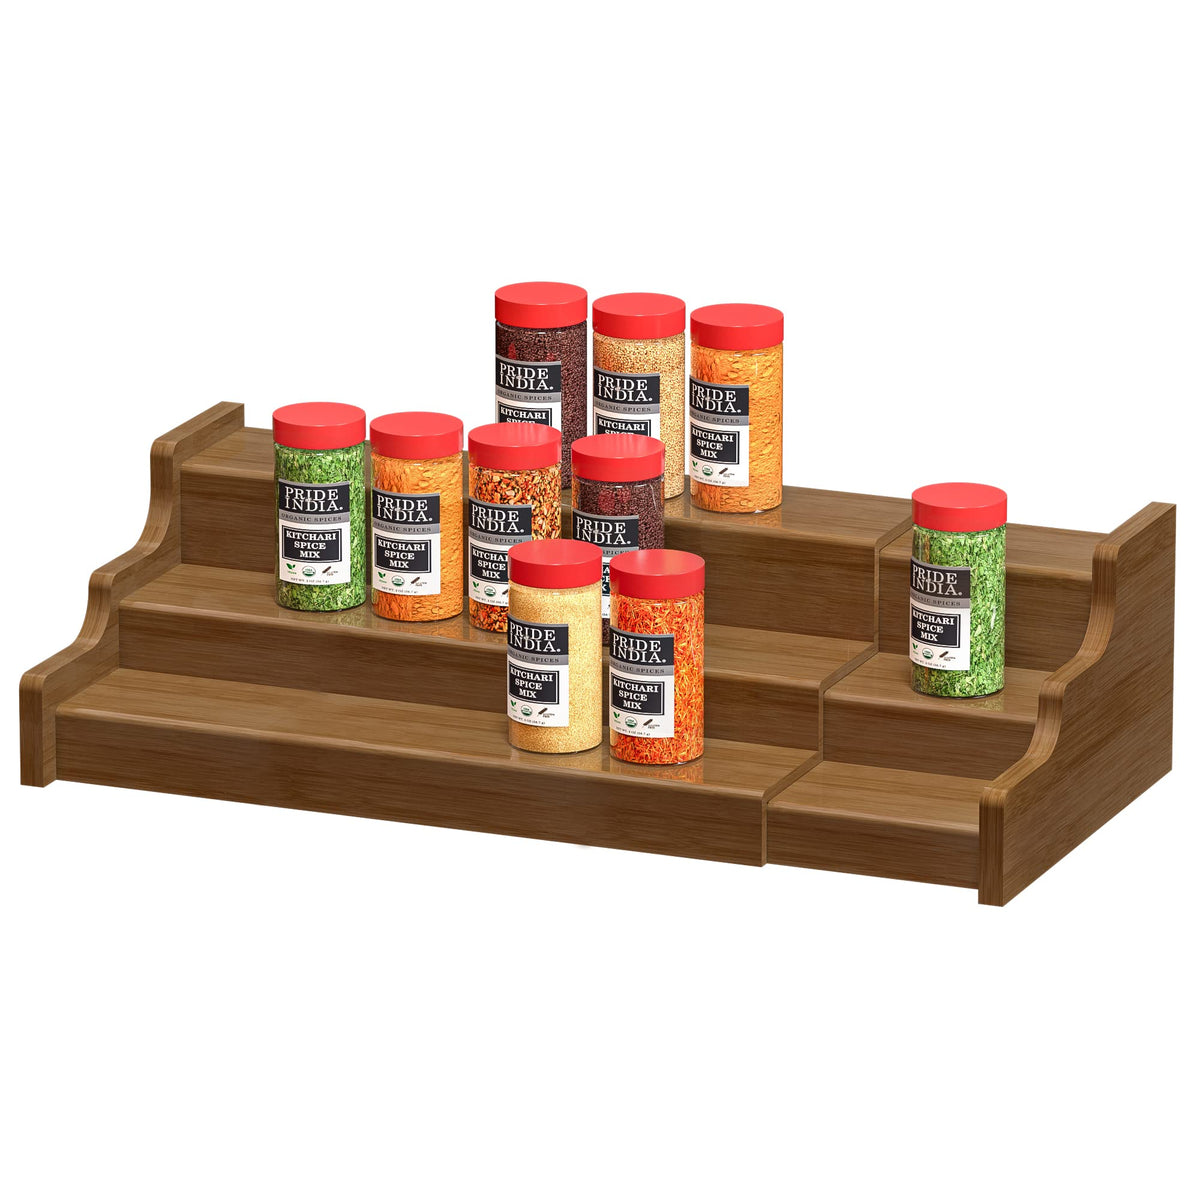 Natural Bamboo Spice Shelf - 3-Tier, Expandable - 12 1/2 x 9 3/4 x 4 1/4  - 1 count box